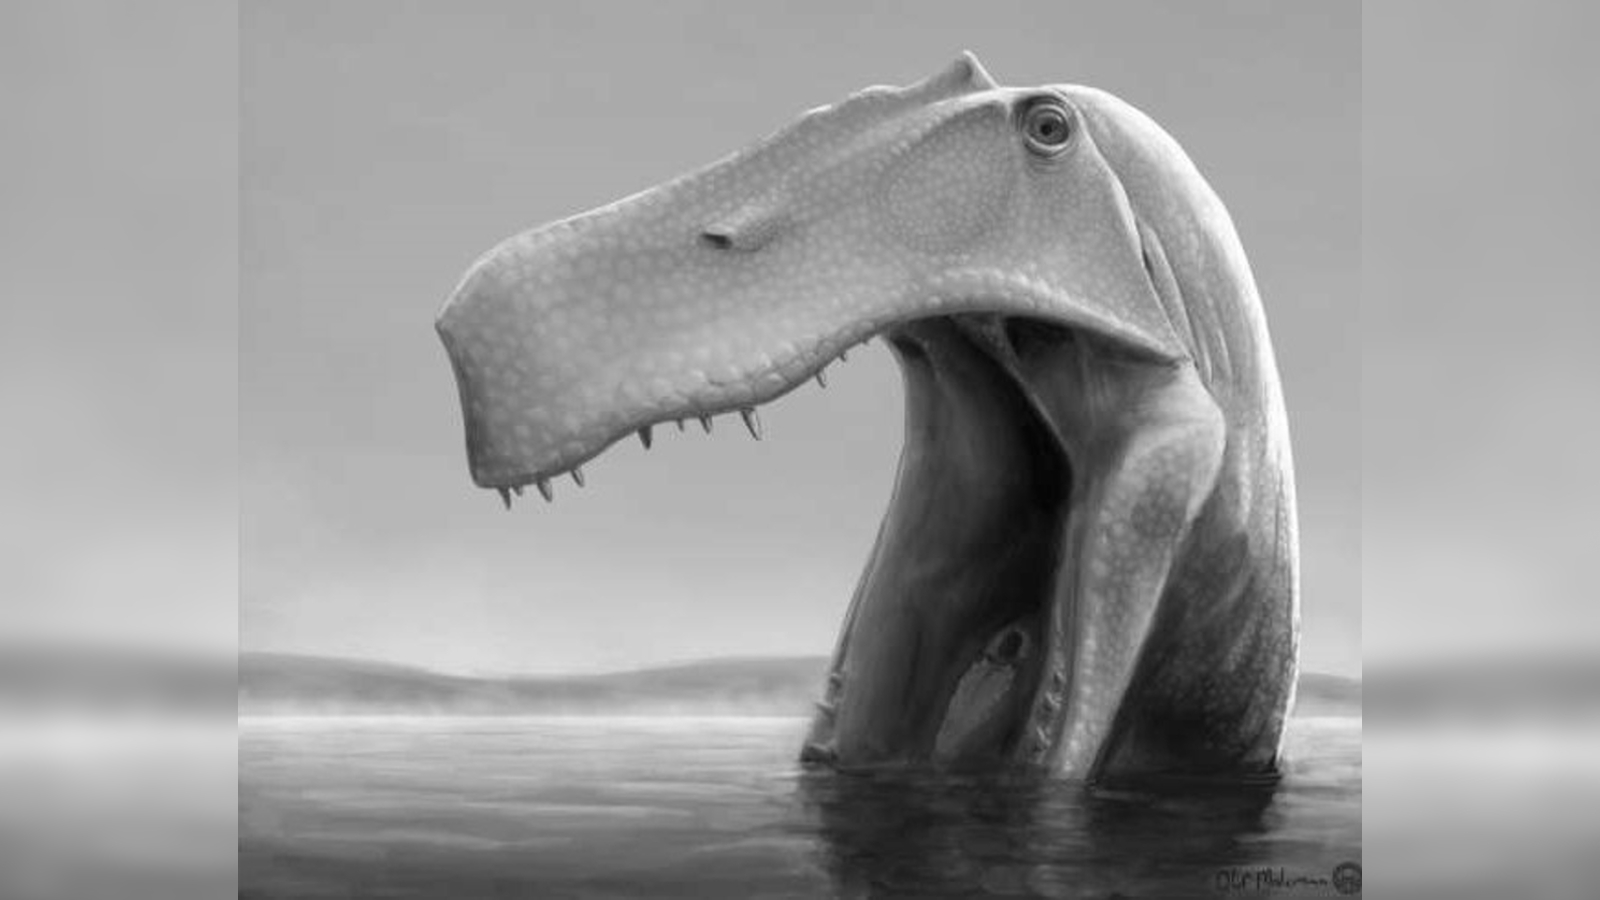 A black and white image of a dinosaur scooping its lower skull through water